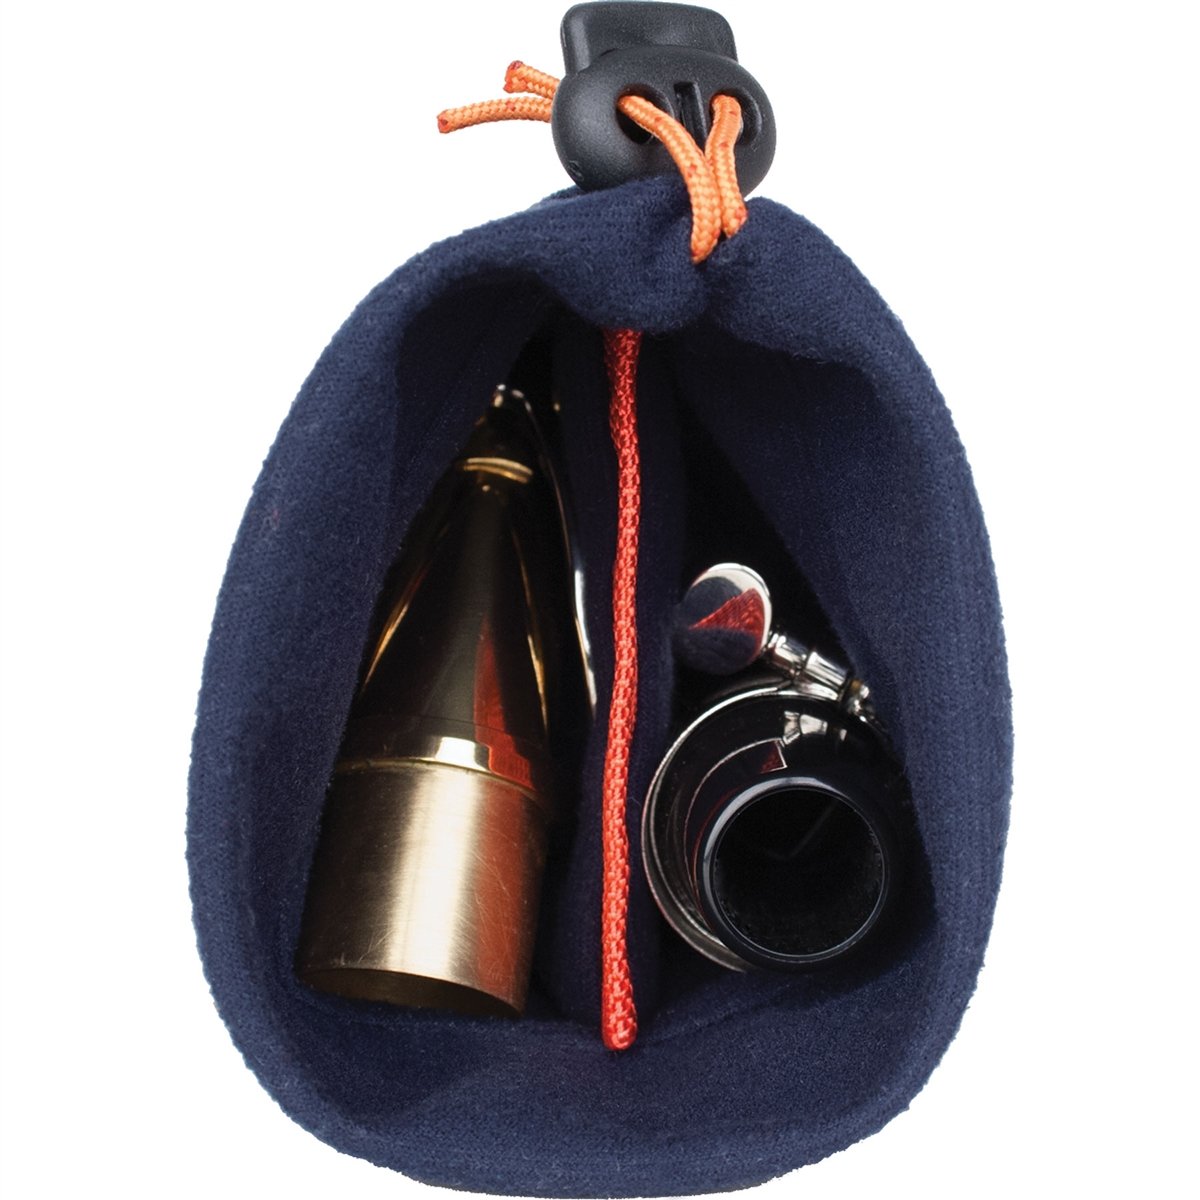 Protec - In-Bell Storage Pouch (for Baritone Saxophone)-Accessories-Protec-Music Elements